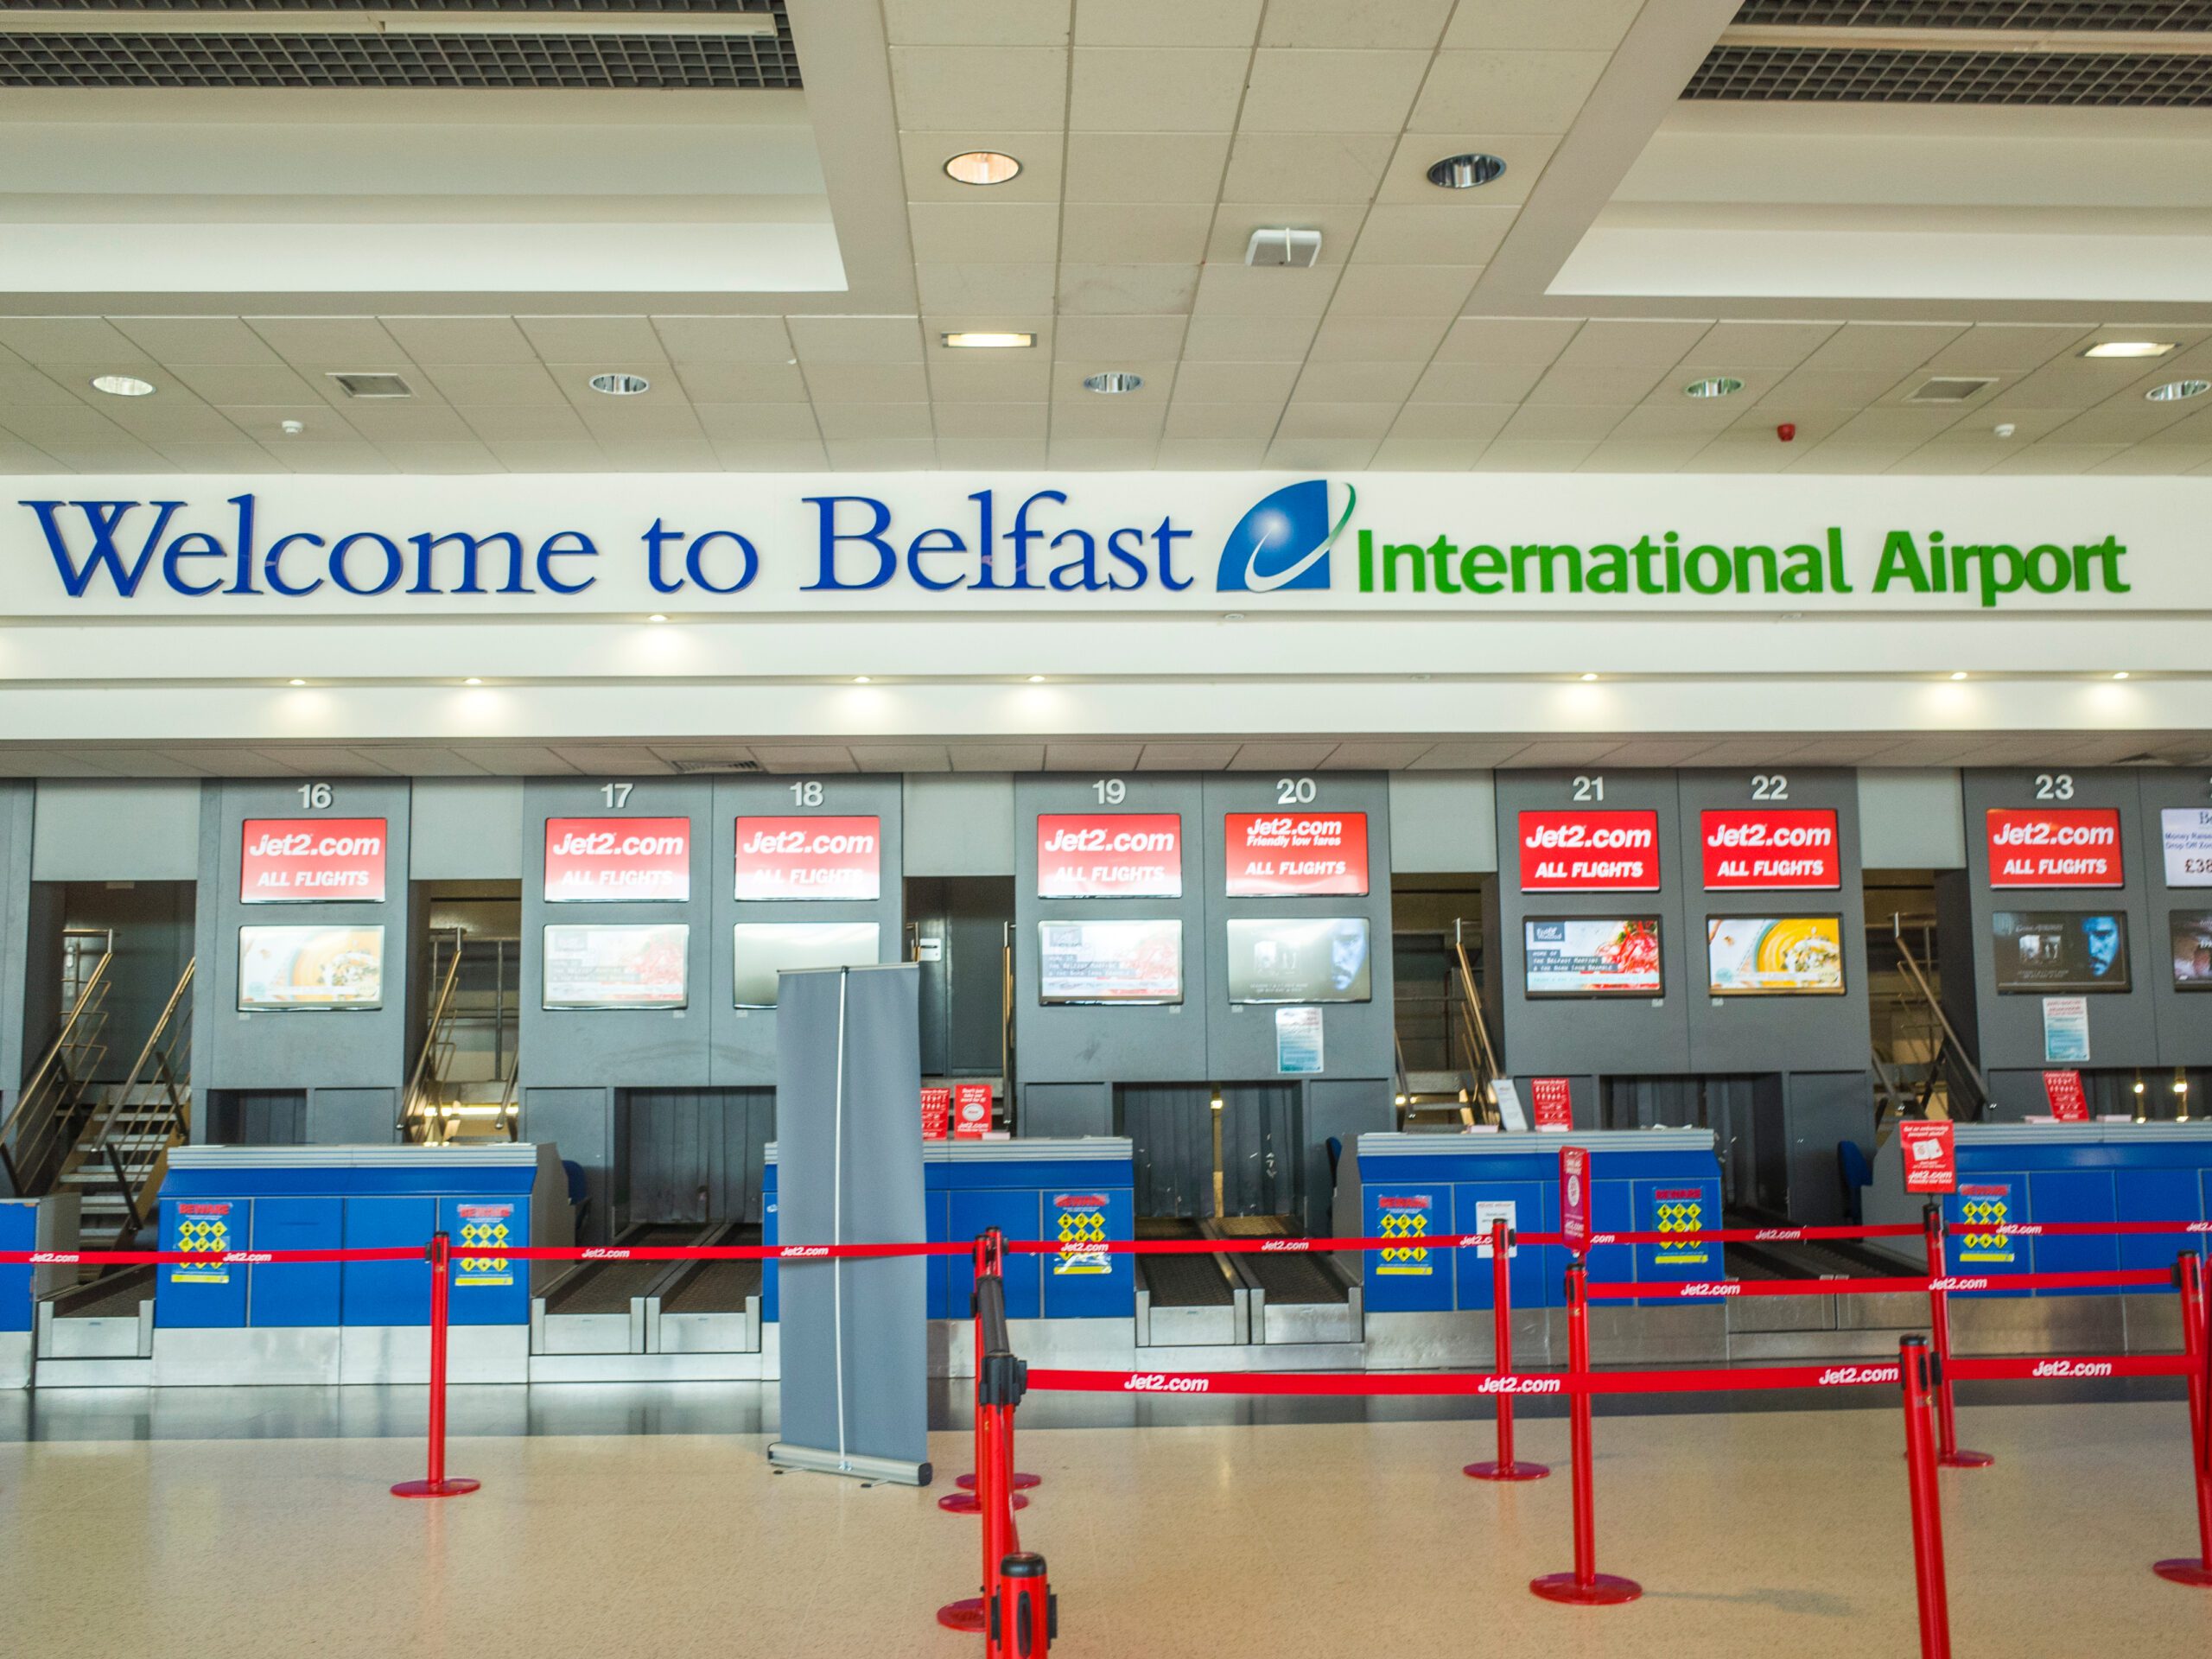 A photo taken just inside the Belfast International Airport showing a roped-off check-in line in front of the airline counters with a welcome sign above them.